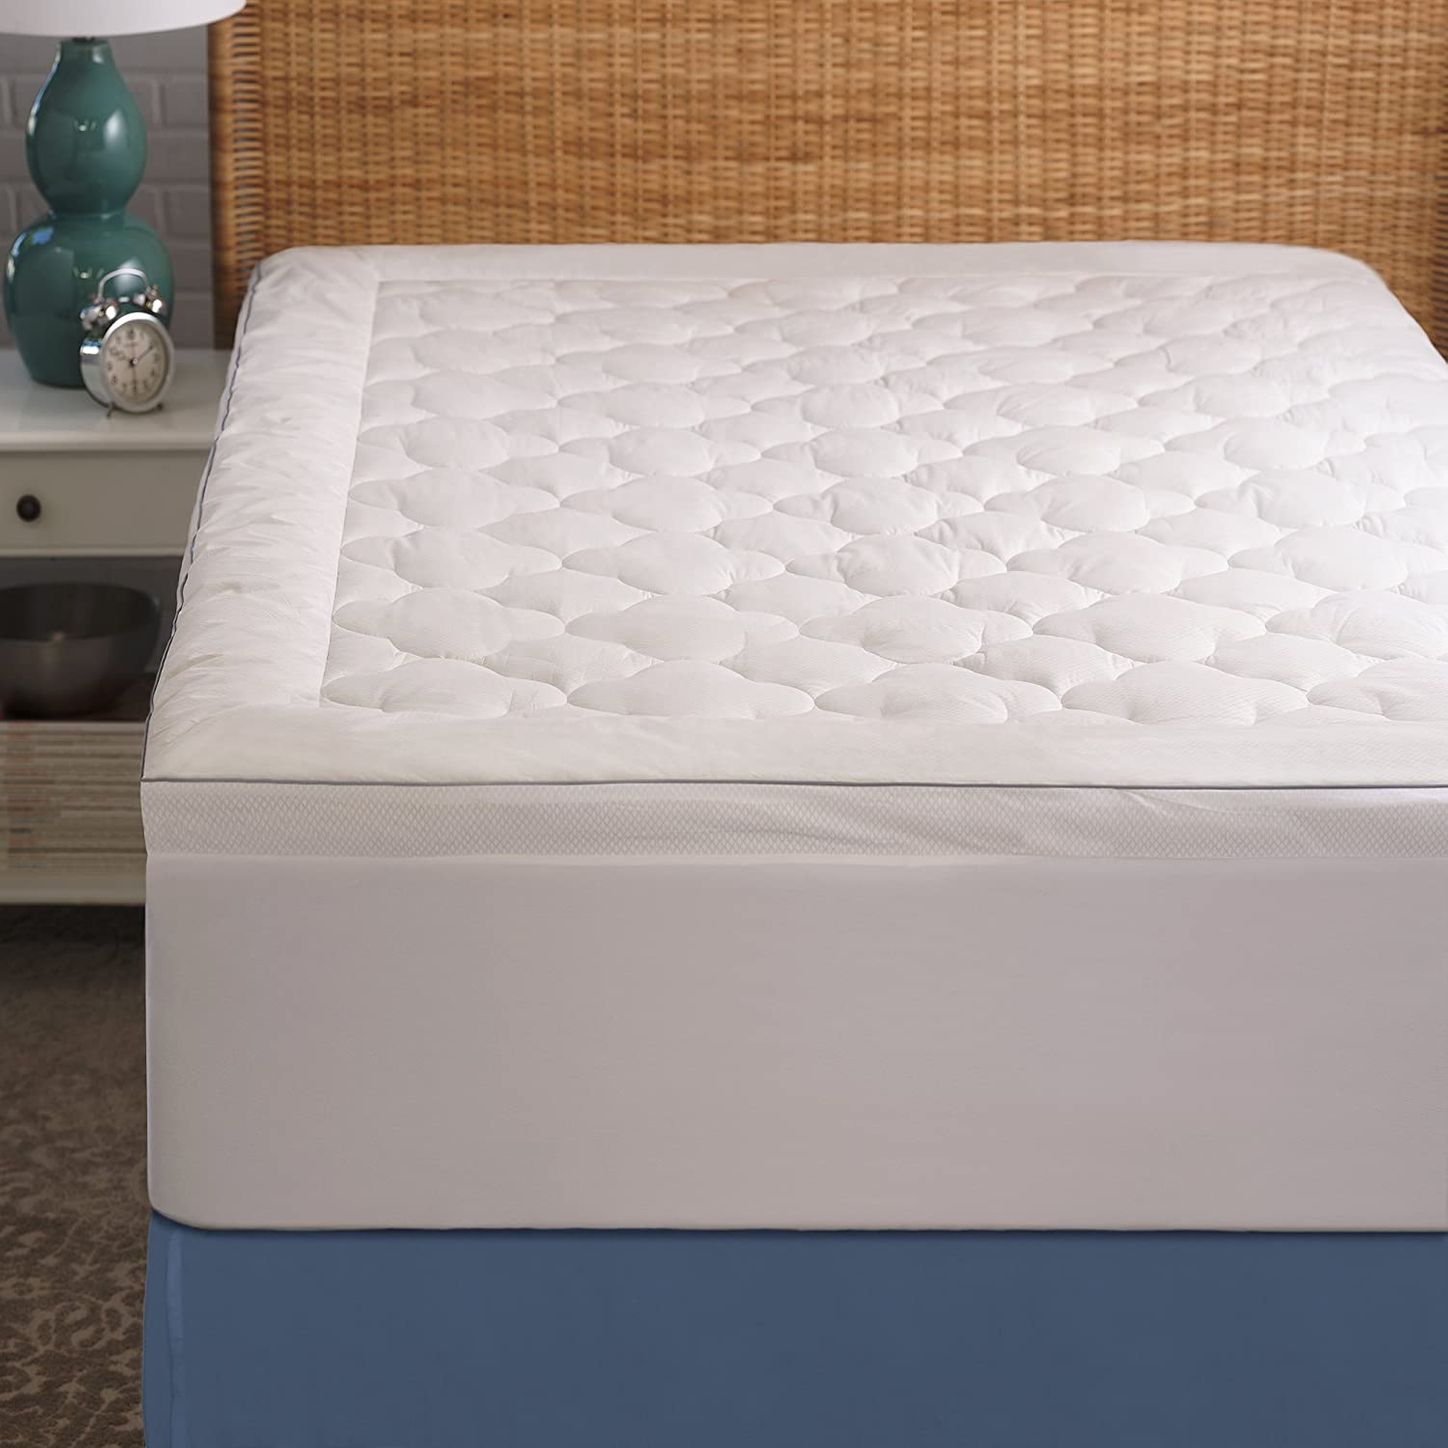 how does a cooling mattress pad work